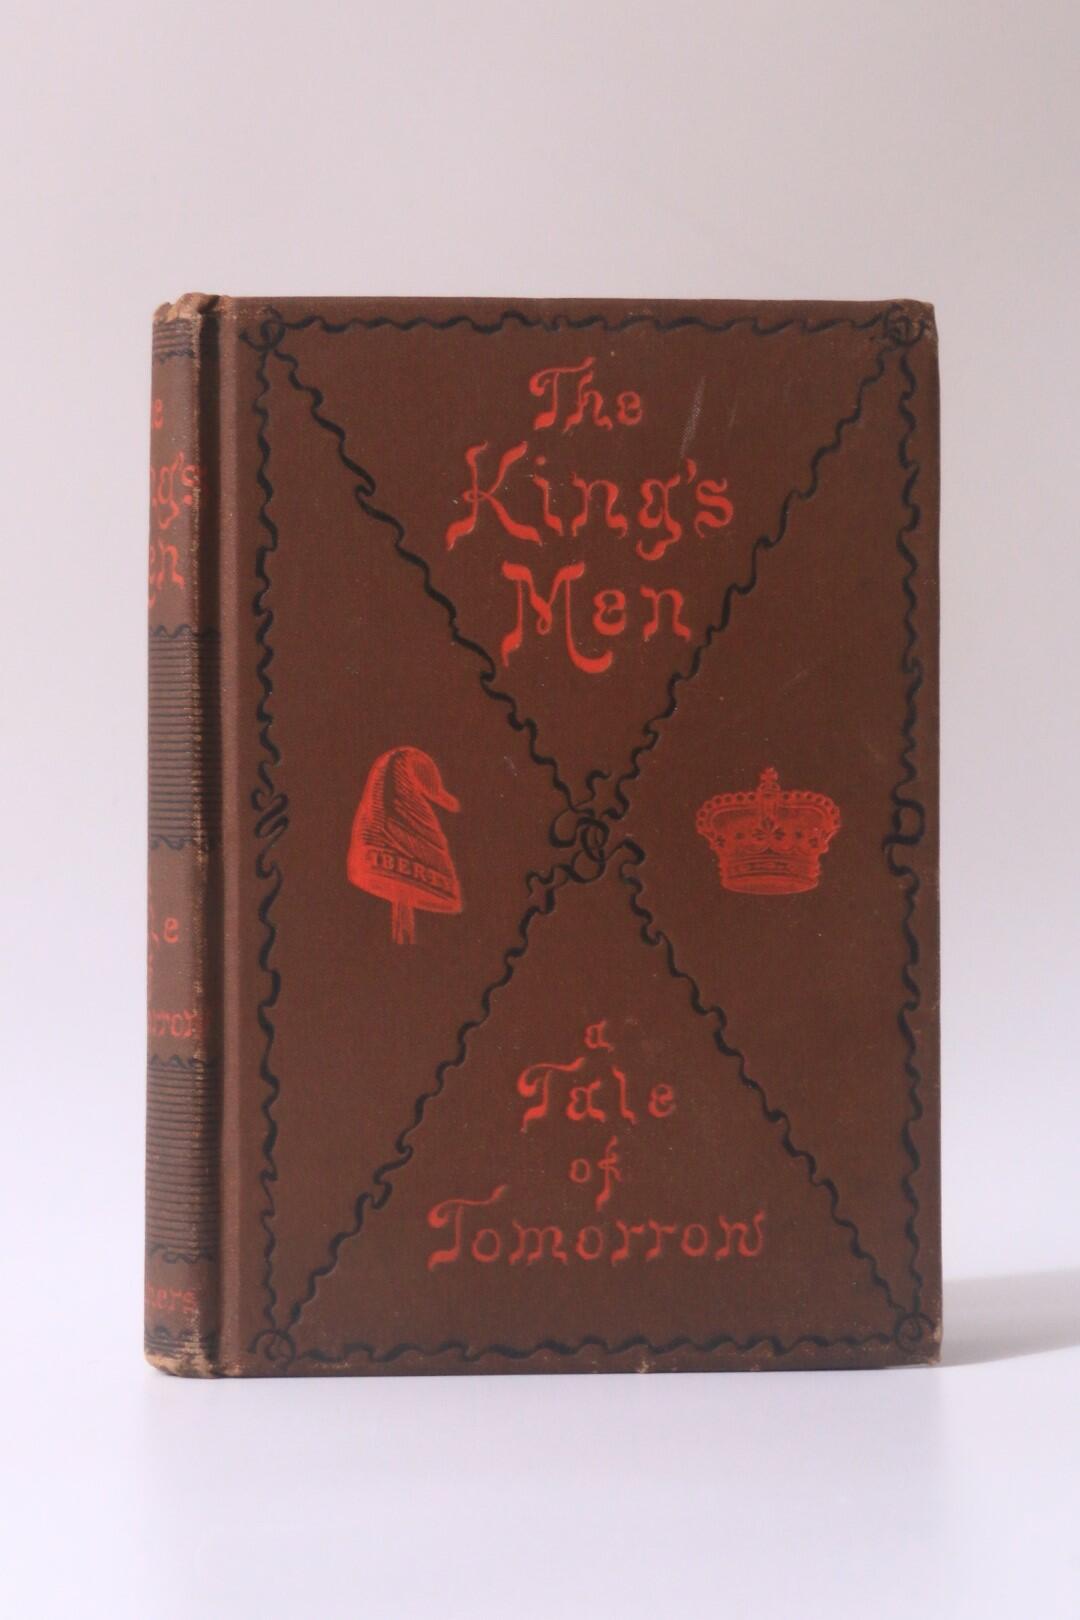 Robert Grant, John Boyle O'Reilly, J.S. of Dale, and John T. Wheelwright - The King's Men: A Tale of Tomorrow - Charles Scribner's, 1884, First Edition.